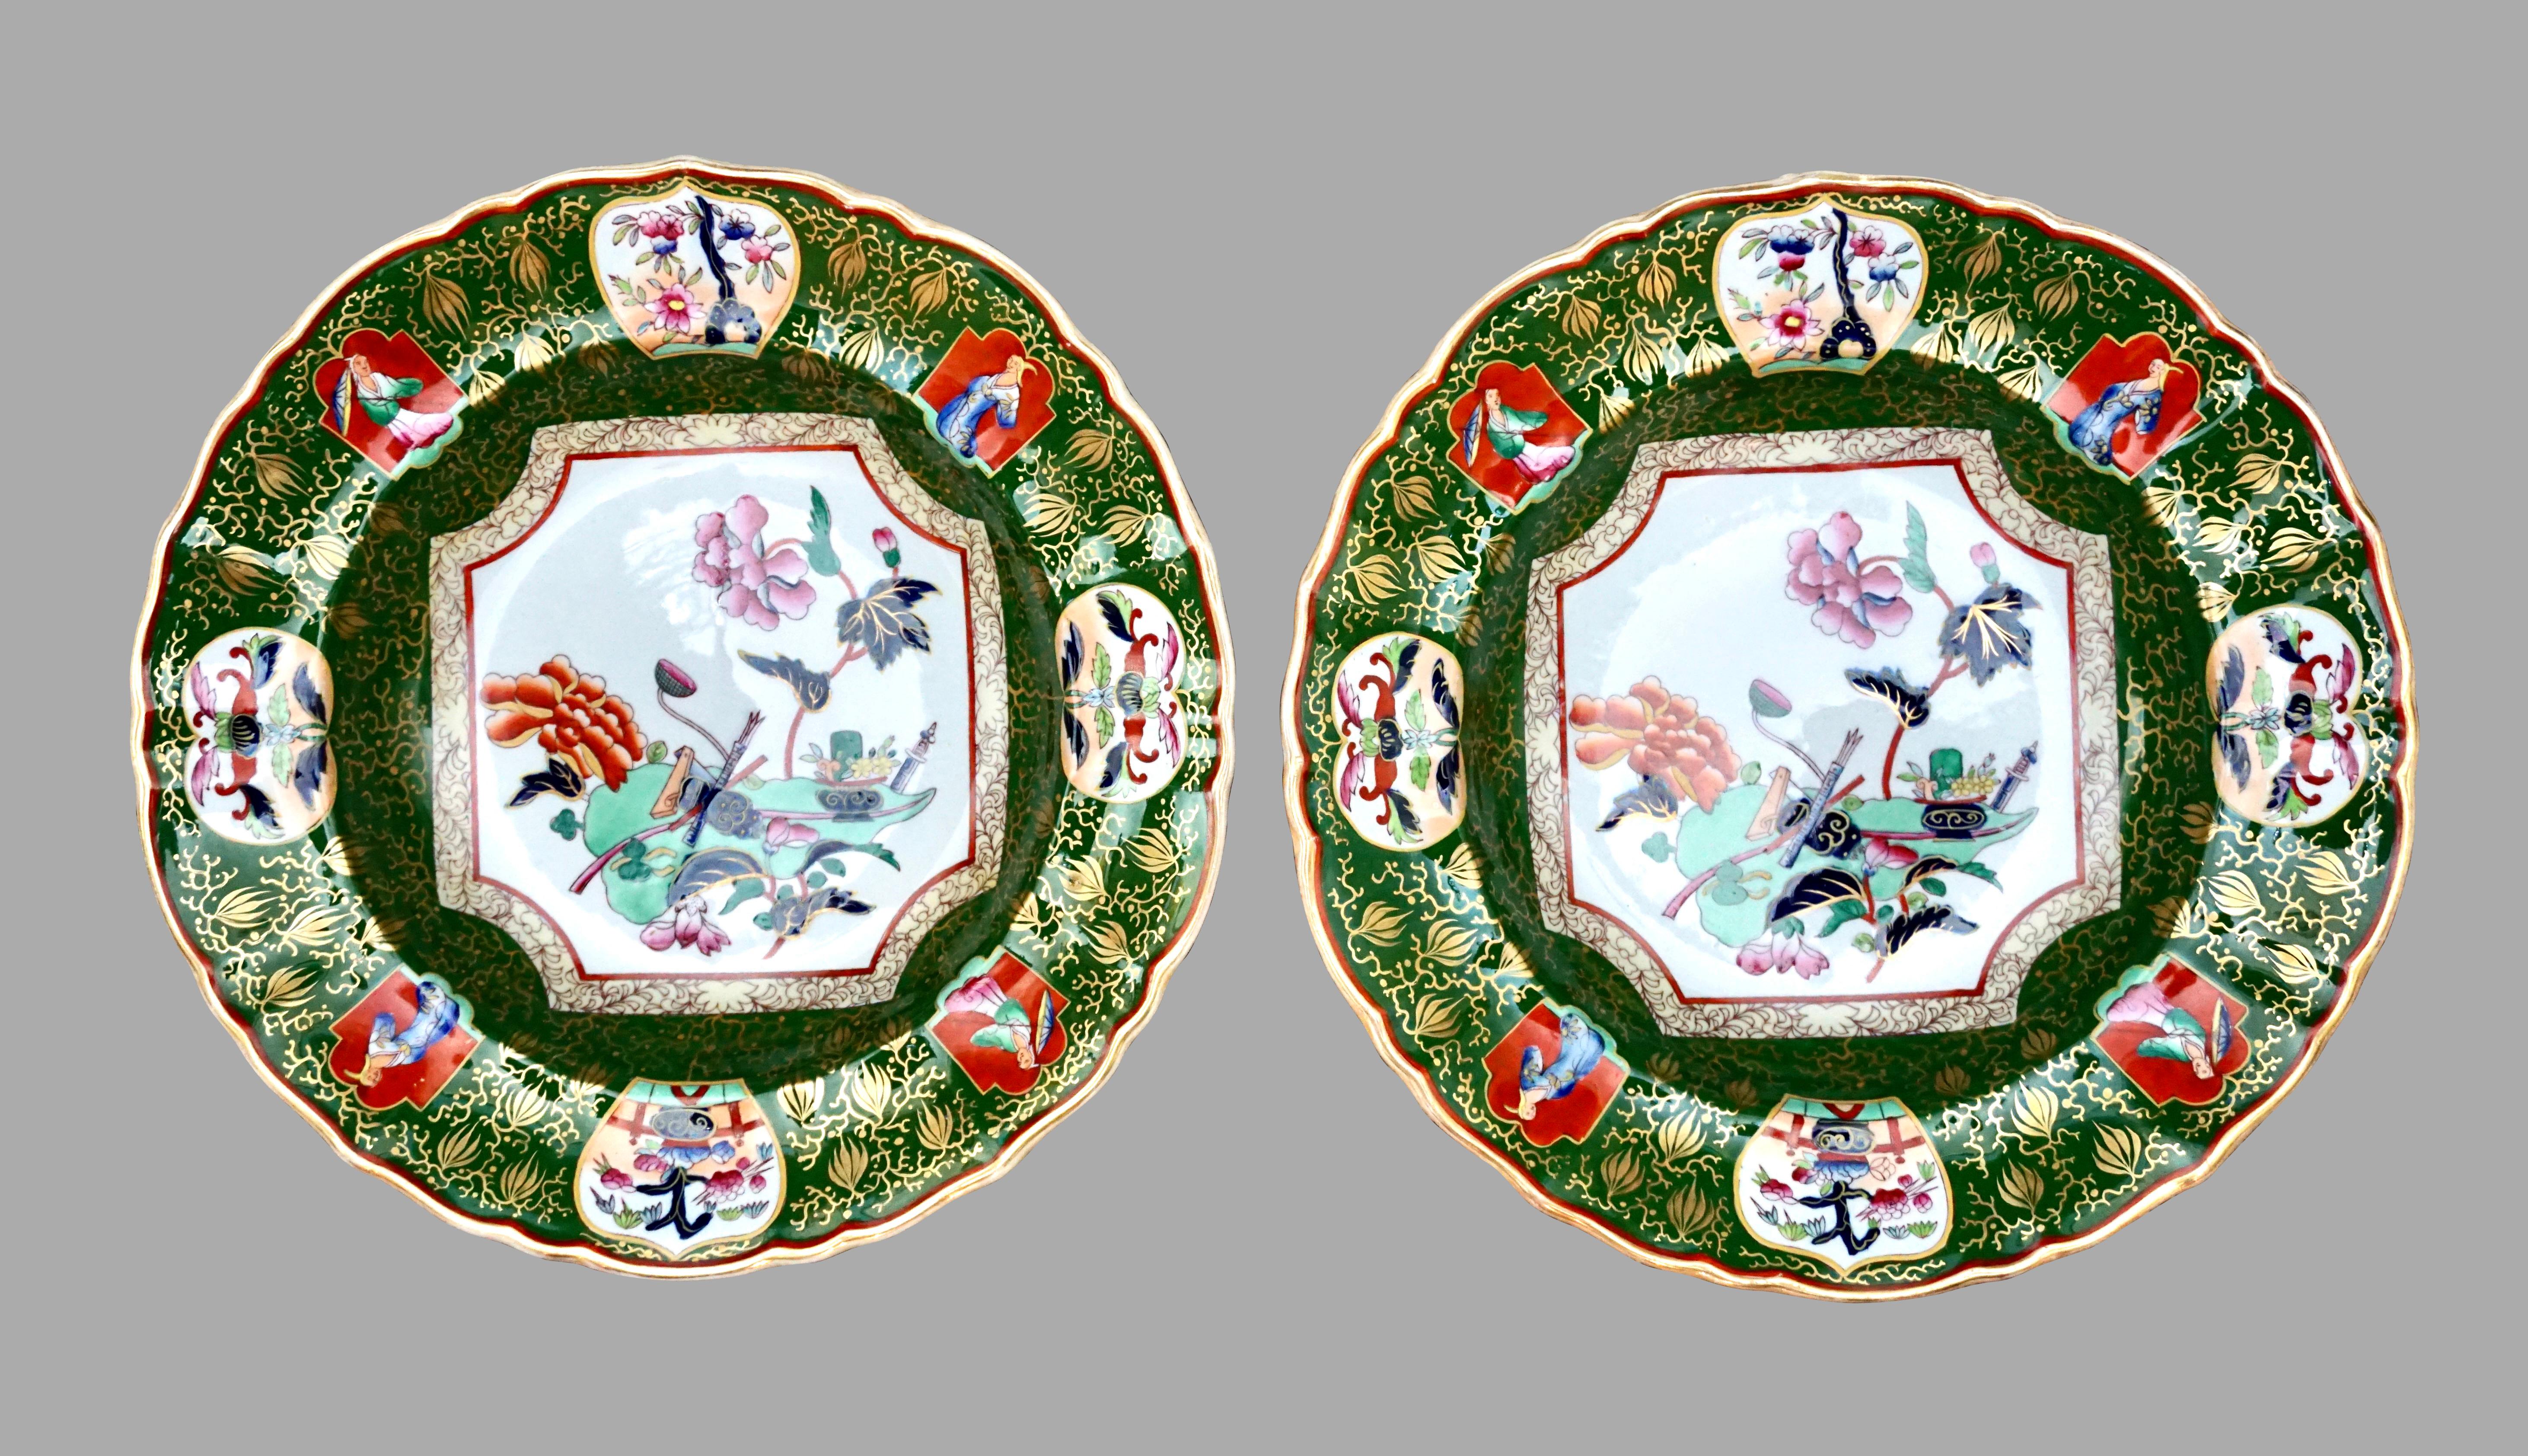 An exuberant pair of English Asian influenced Ironstone bowls hand decorated with green, rose, orange and blue garbed figures in perimeter cartouches, 2 with parasols, further decorated with flowers, trees and plants, all on a gilt-decorated green